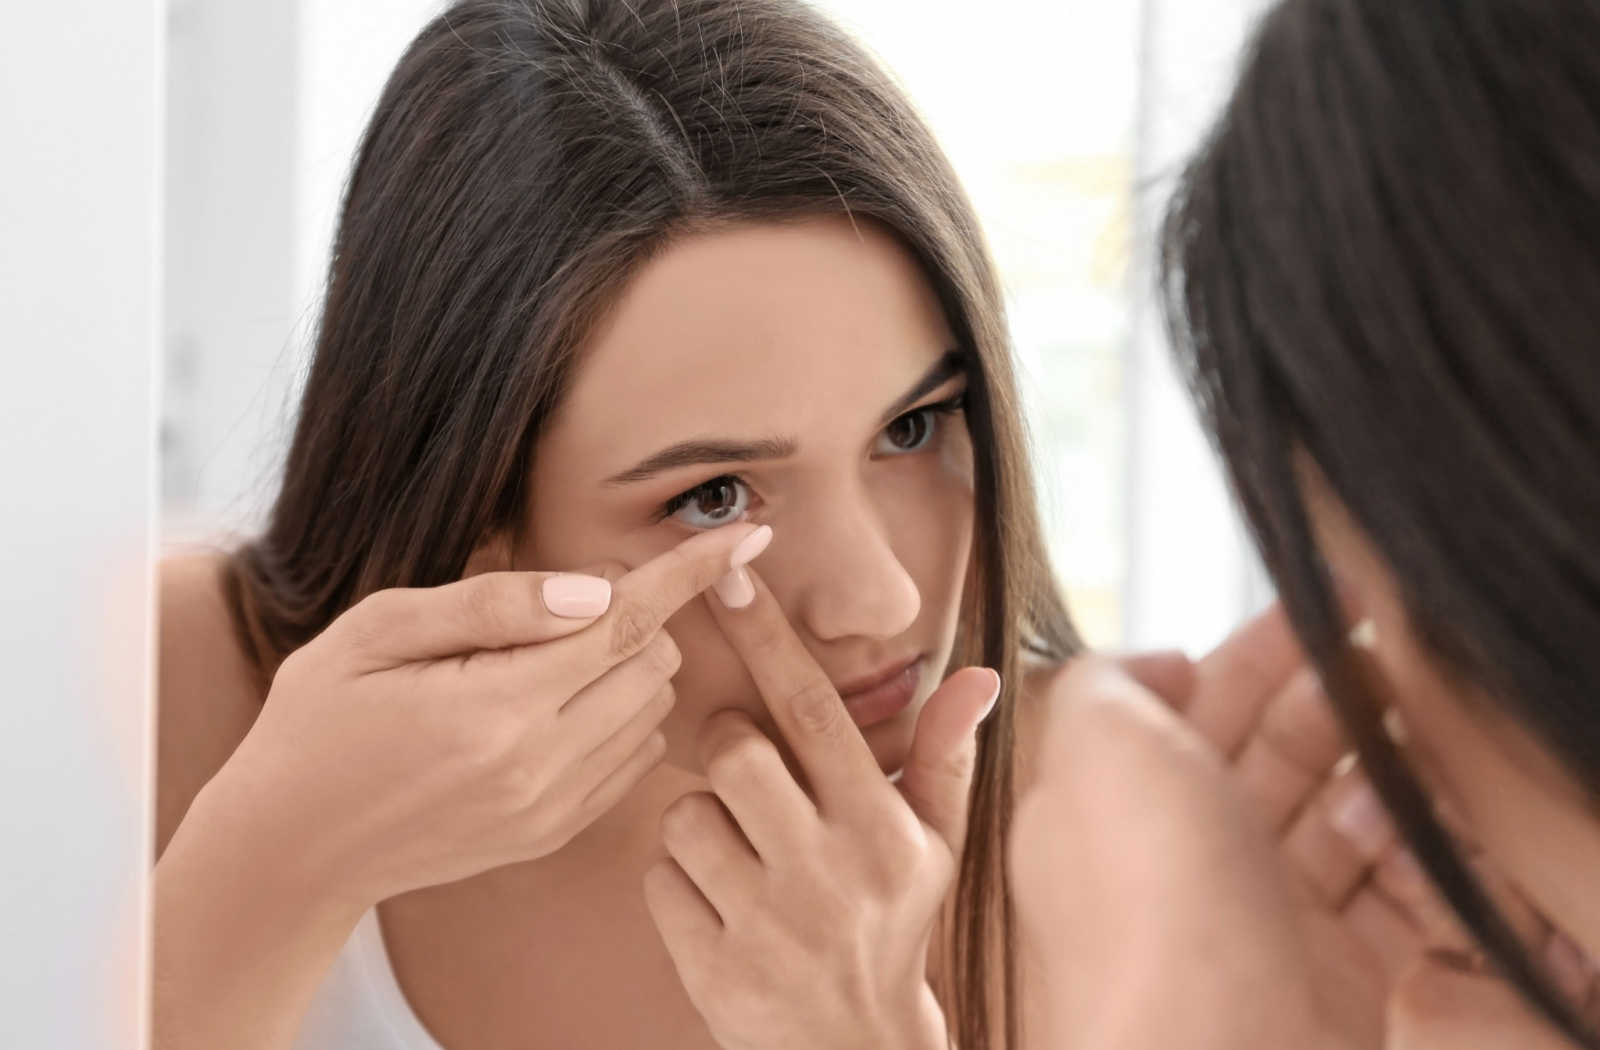 A woman applying a contact lens that does not worsen her dry eye symptoms.